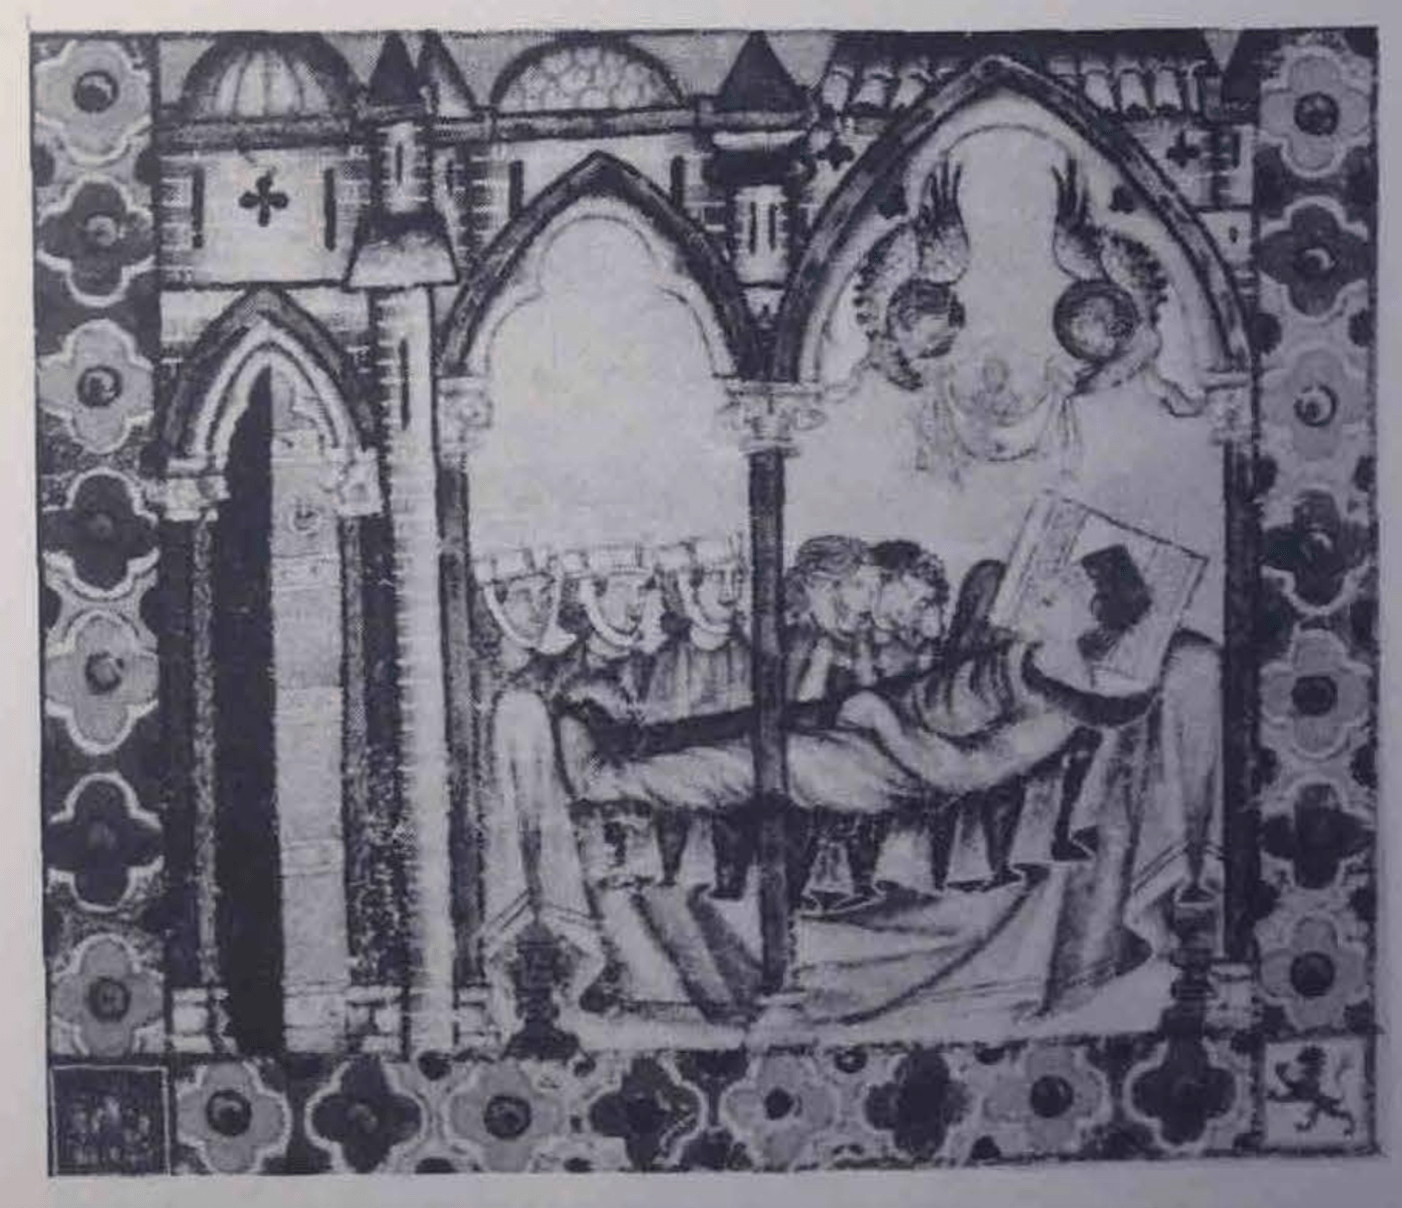 Scene of mourning at an honorable death, with women rending their cheeks, late 13th century Castile. From Cantiga 152, Cantigas de Santa Maria. Image reproduced in Heath Dillard, Daughters of the Reconquest: Women in Castilian Town Society, 1100-1300 (Cambridge: Cambridge University Press, 1984), plate 20.